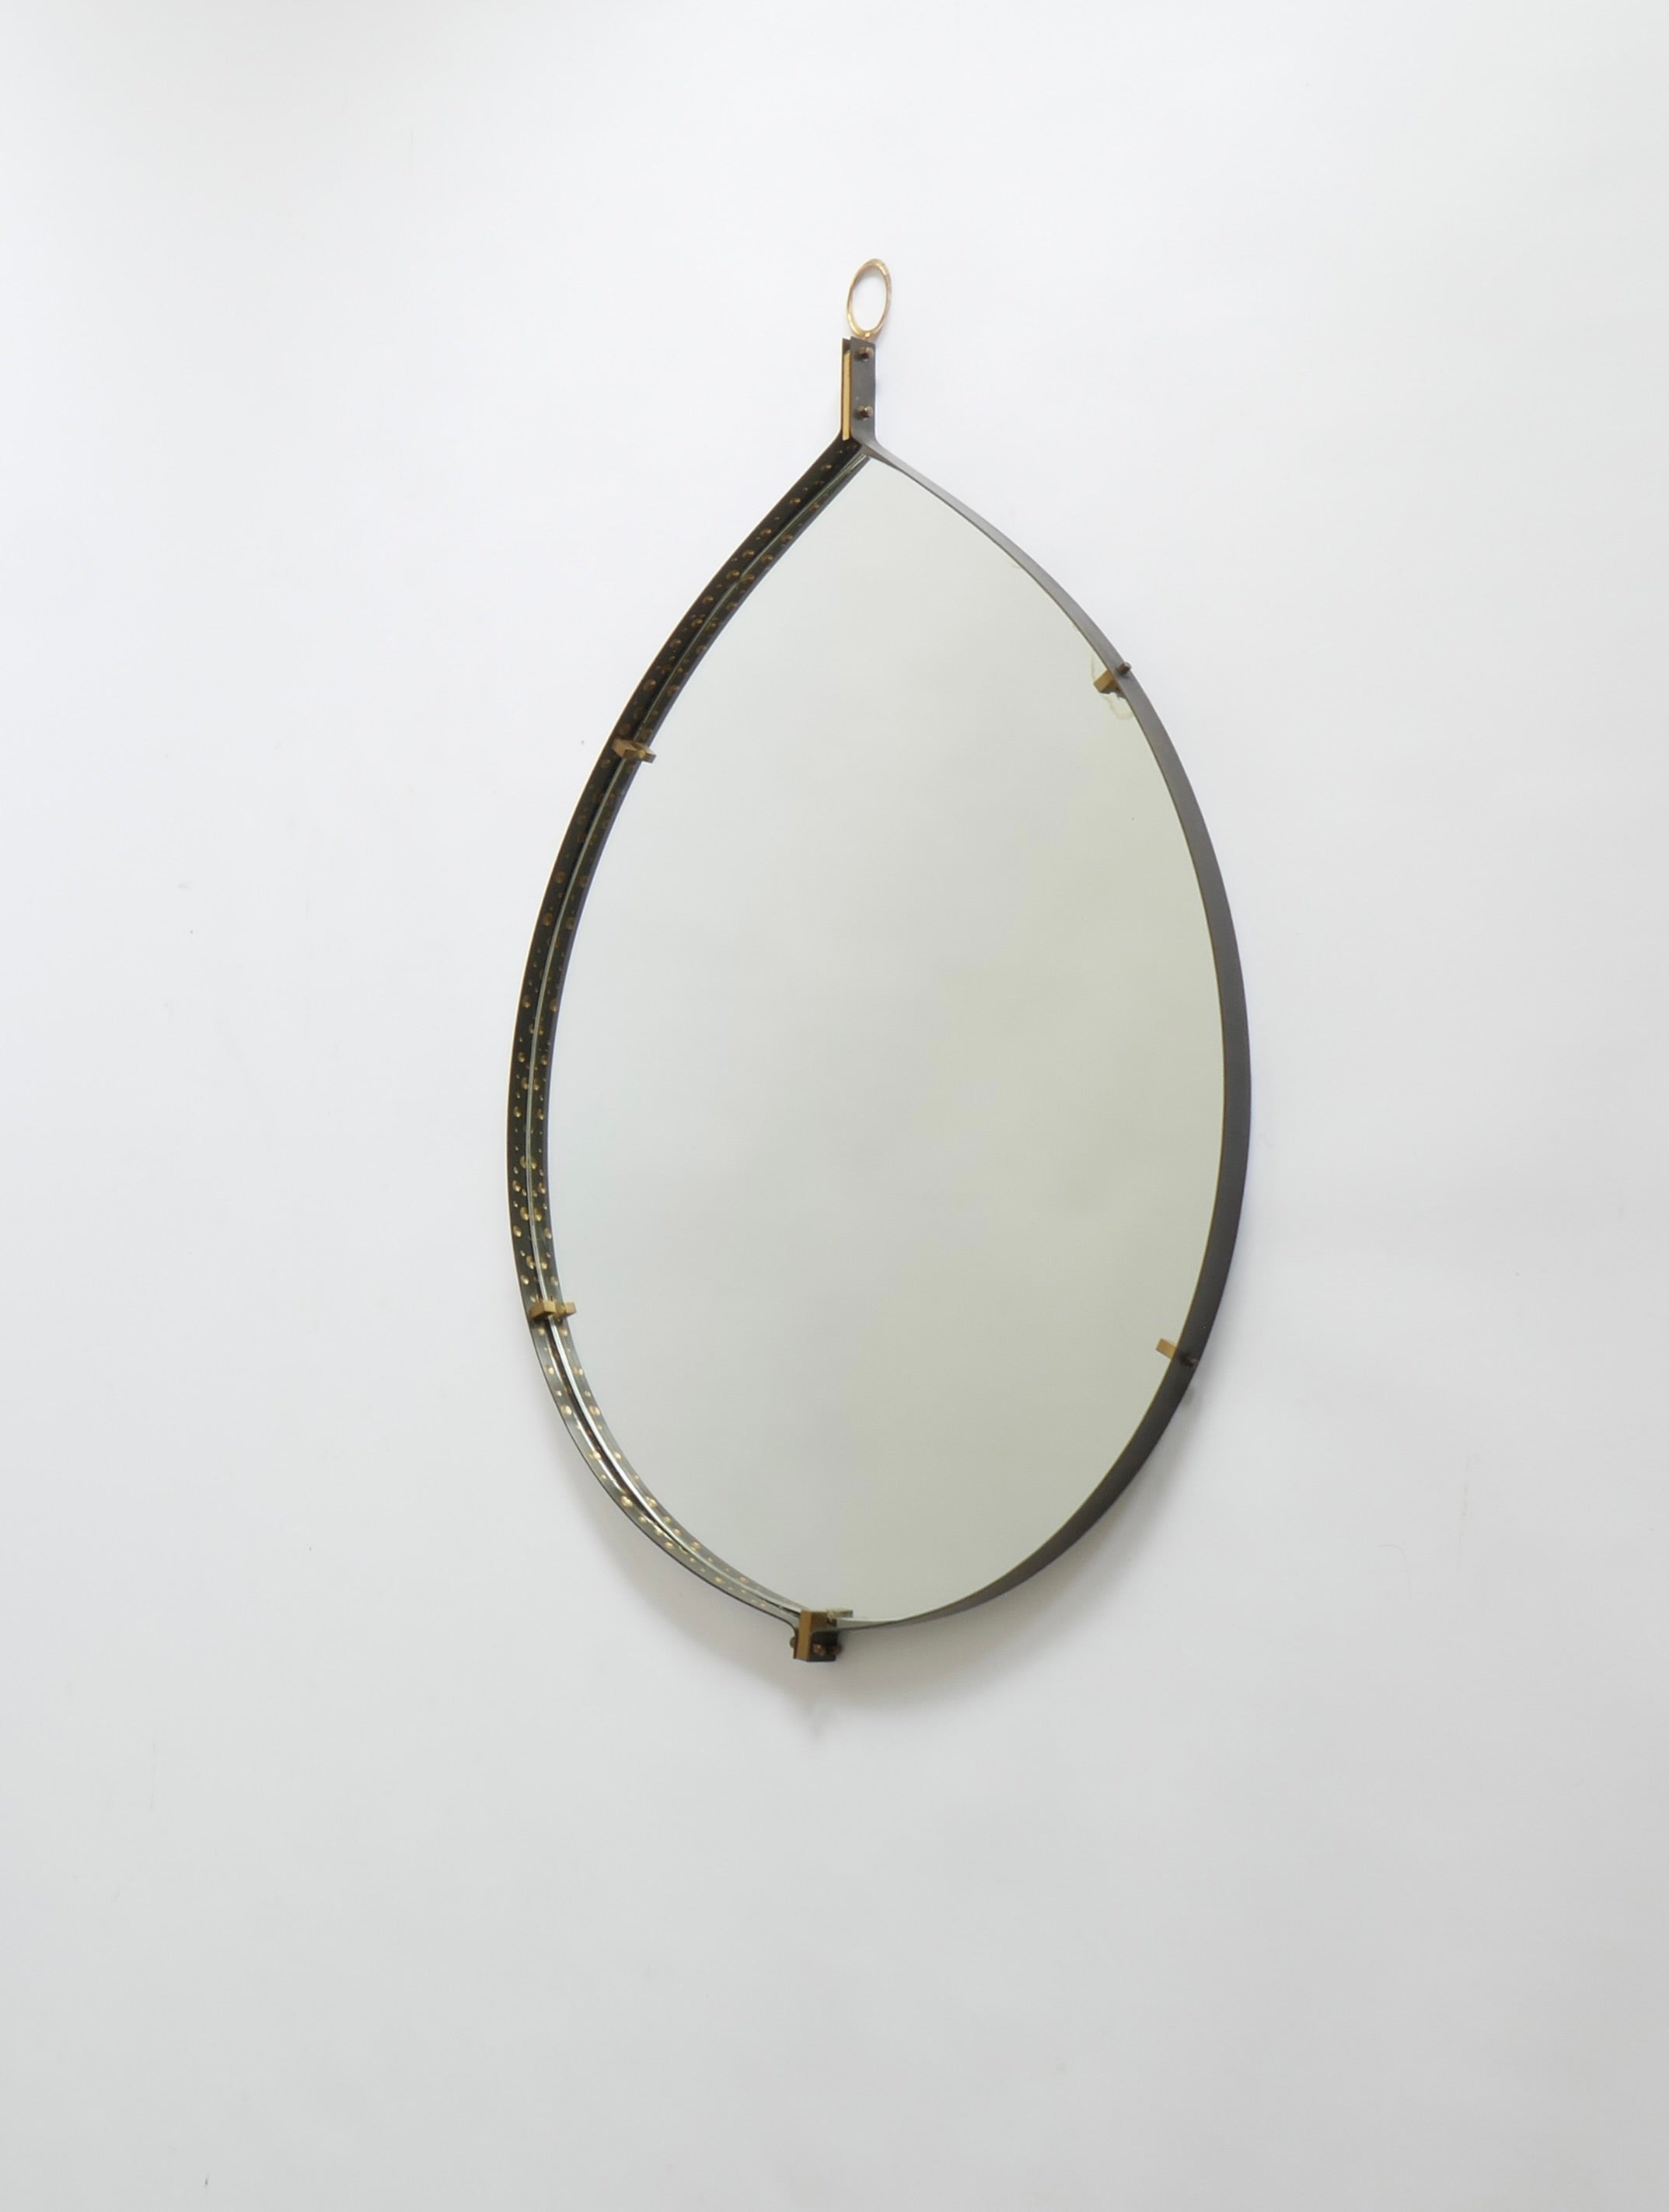 A beautiful handmade teardrop-shaped mirror, within a hammered iron frame, embellished within brass hardware detail.